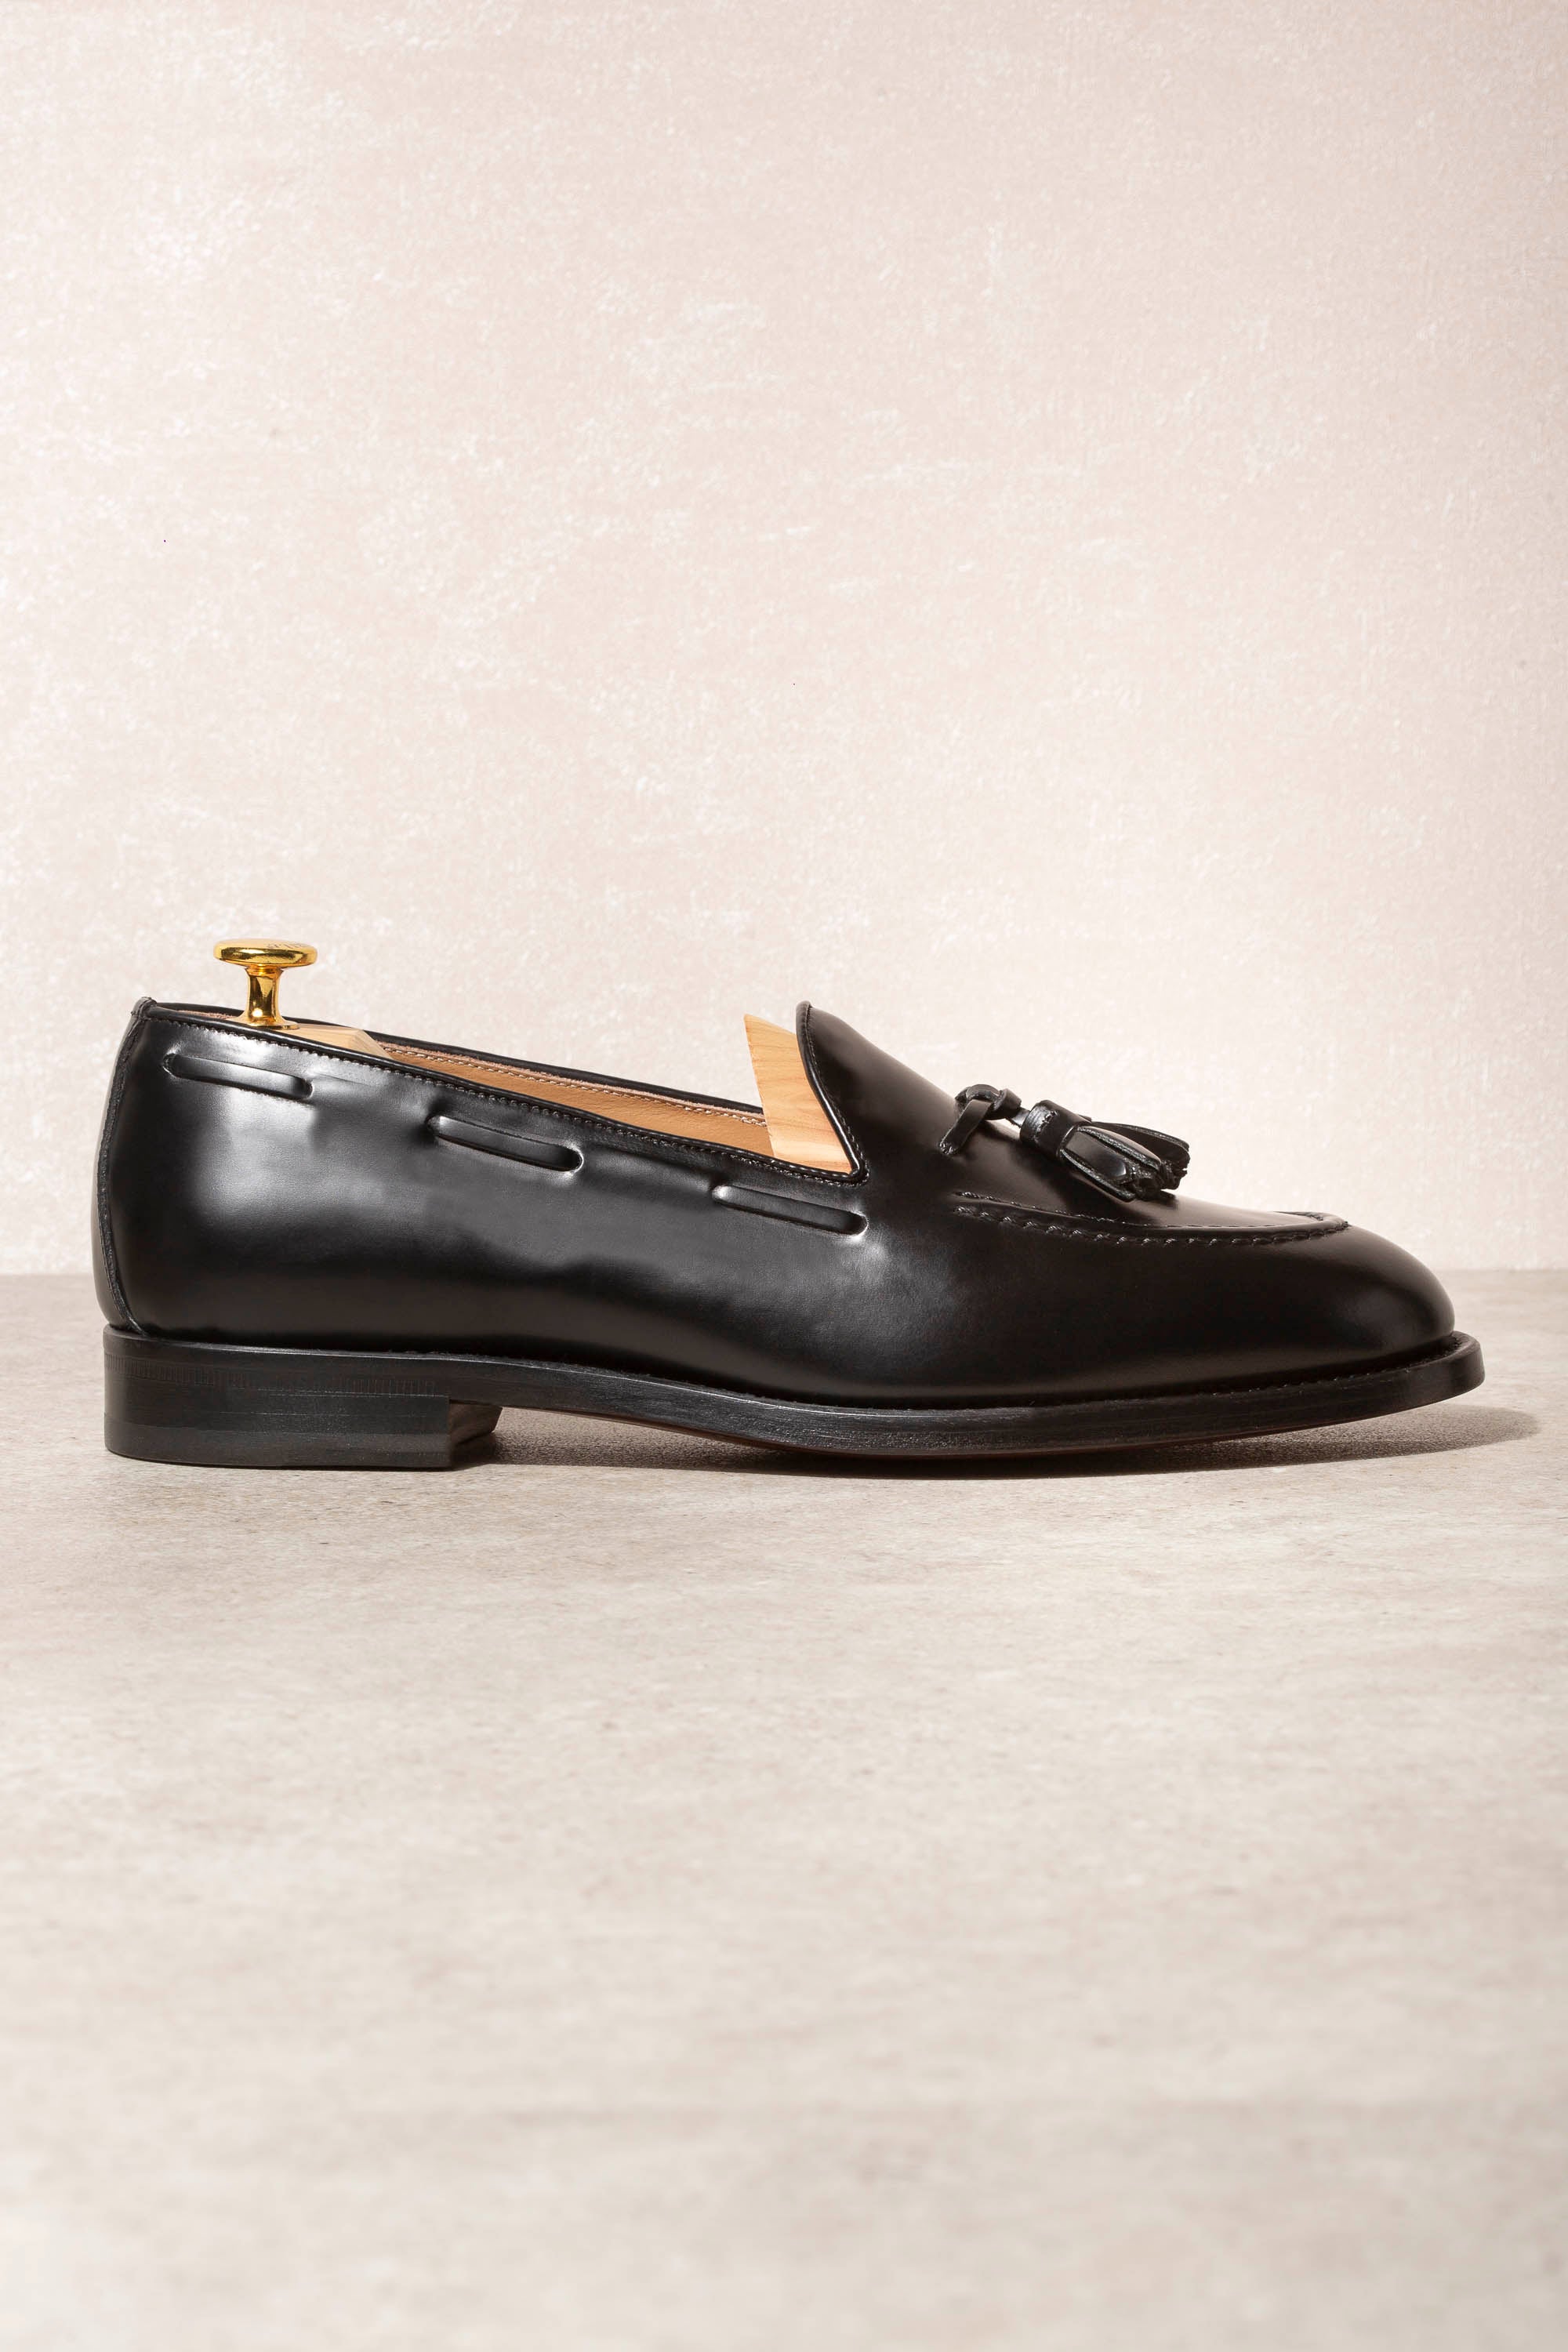 tassel loafers - Made In Italy - Parma